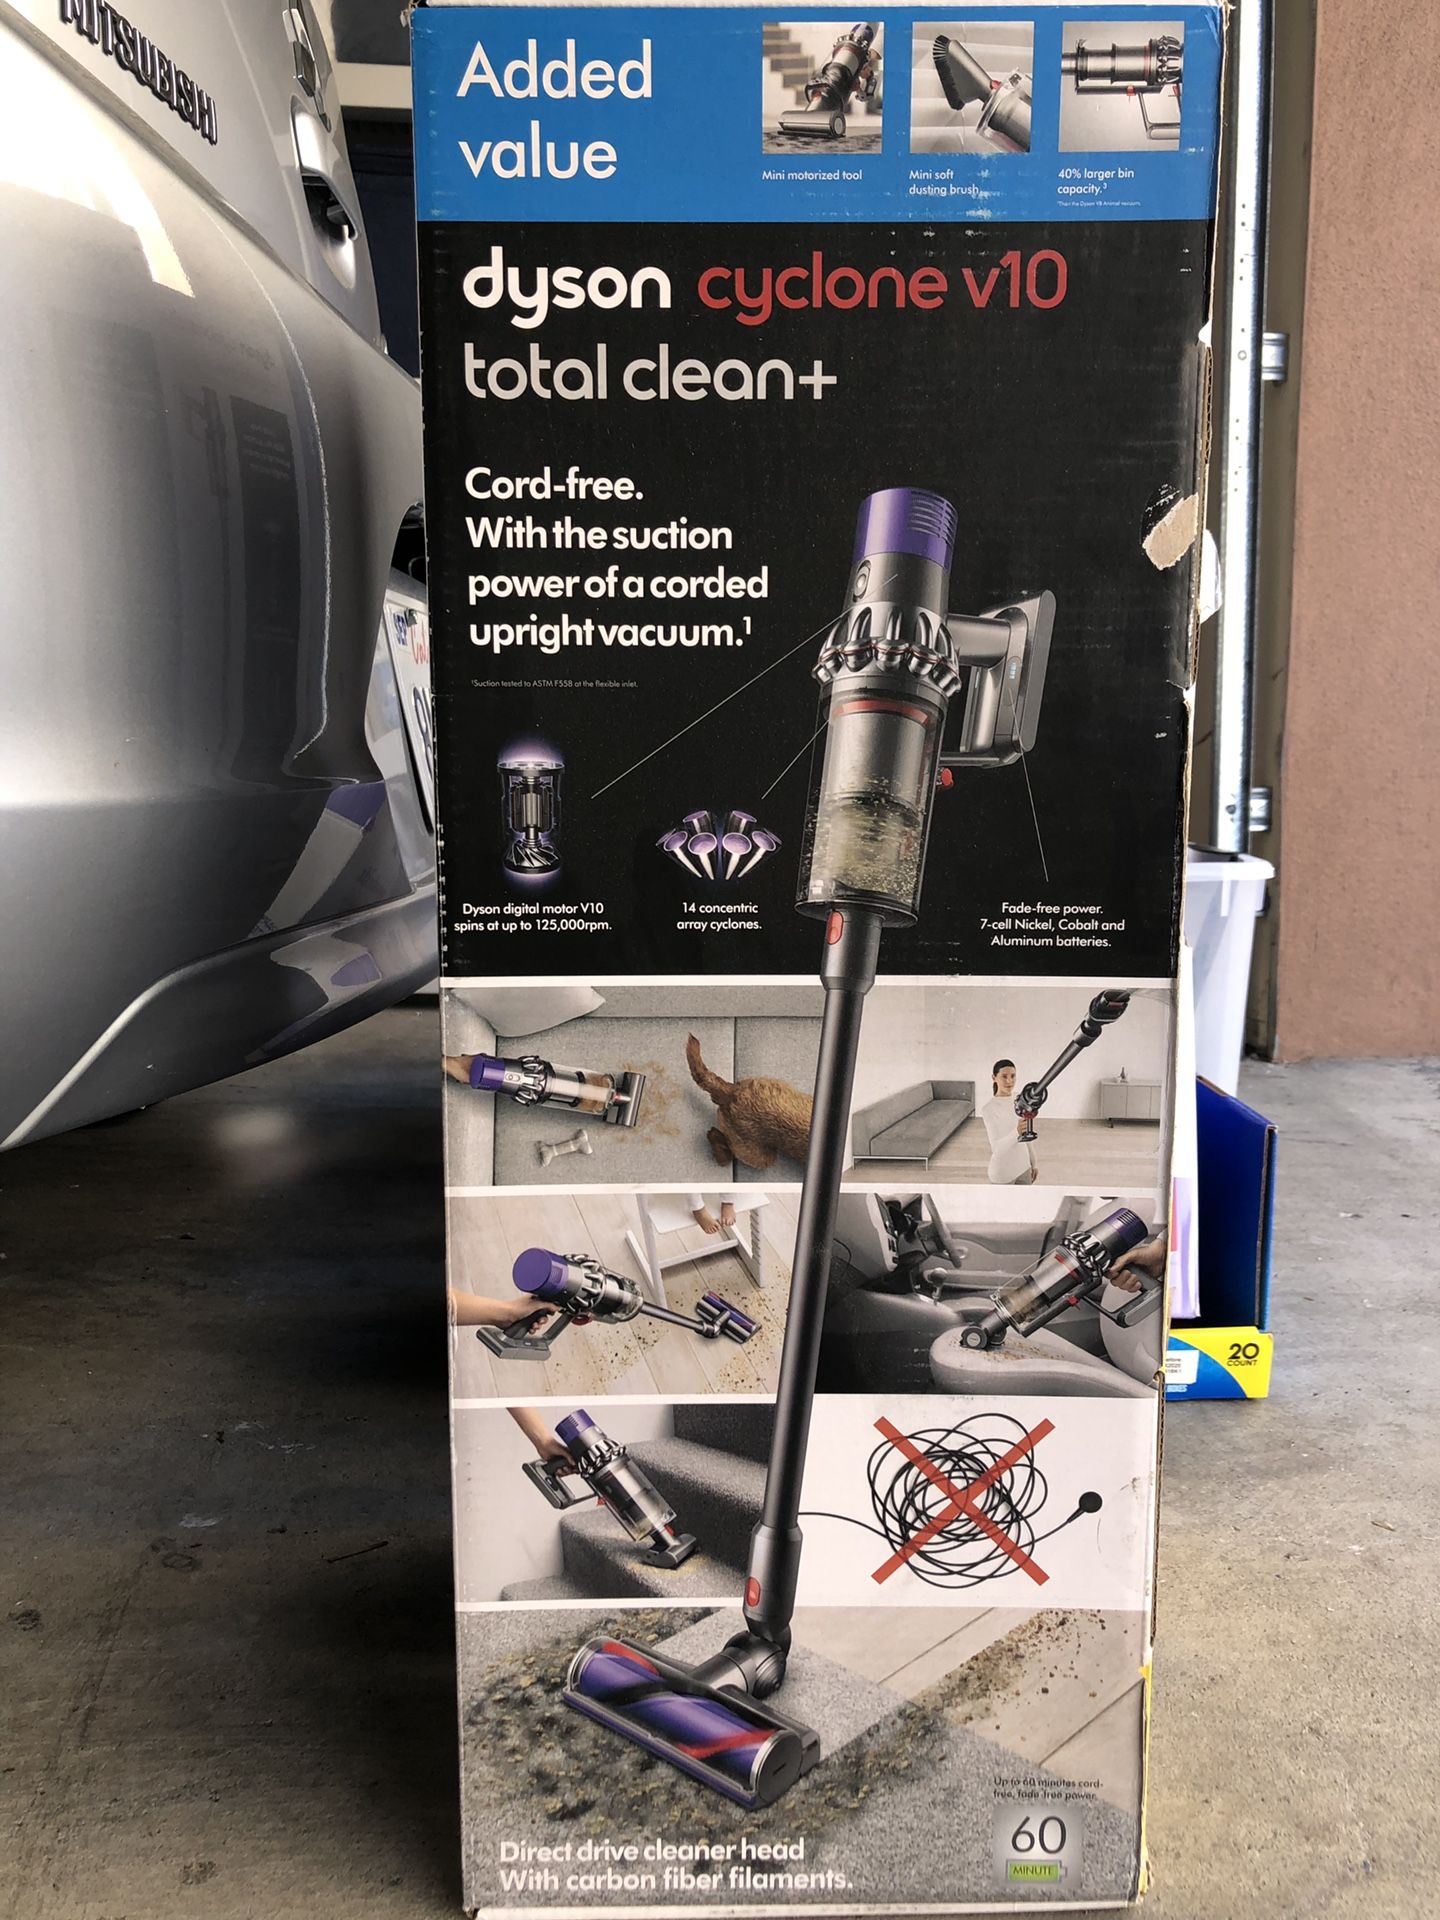 Dyson Cyclone v10 box ONLY. NOT included vacuum.